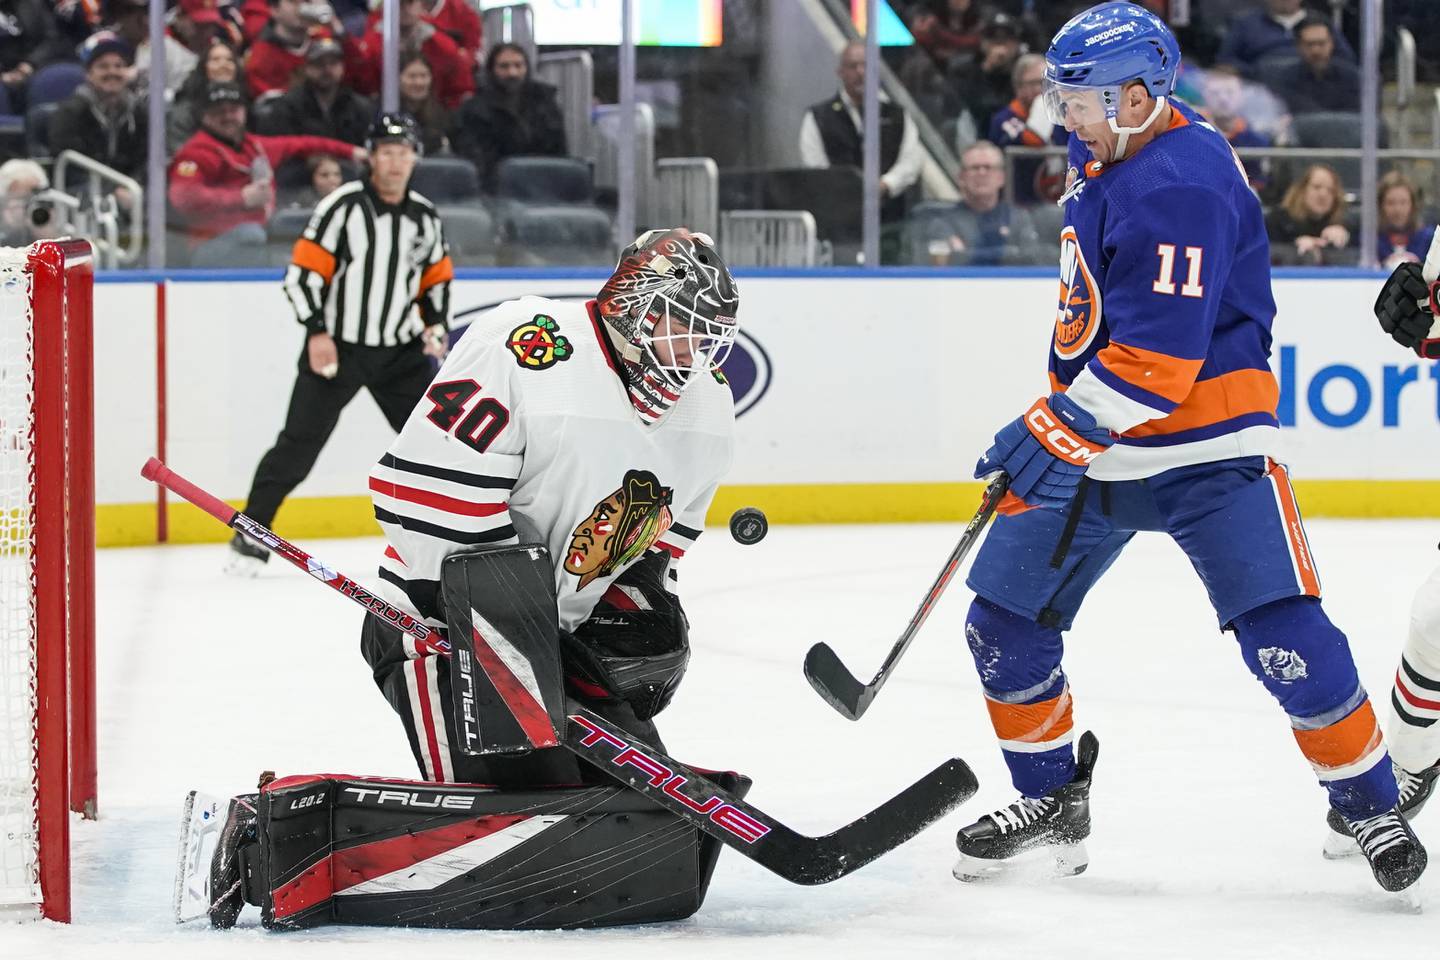 Blackhawks goalie Arvid Söderblom makes a save next to the Islanders'Zach Parise during the second period on Dec. 4, 2022.